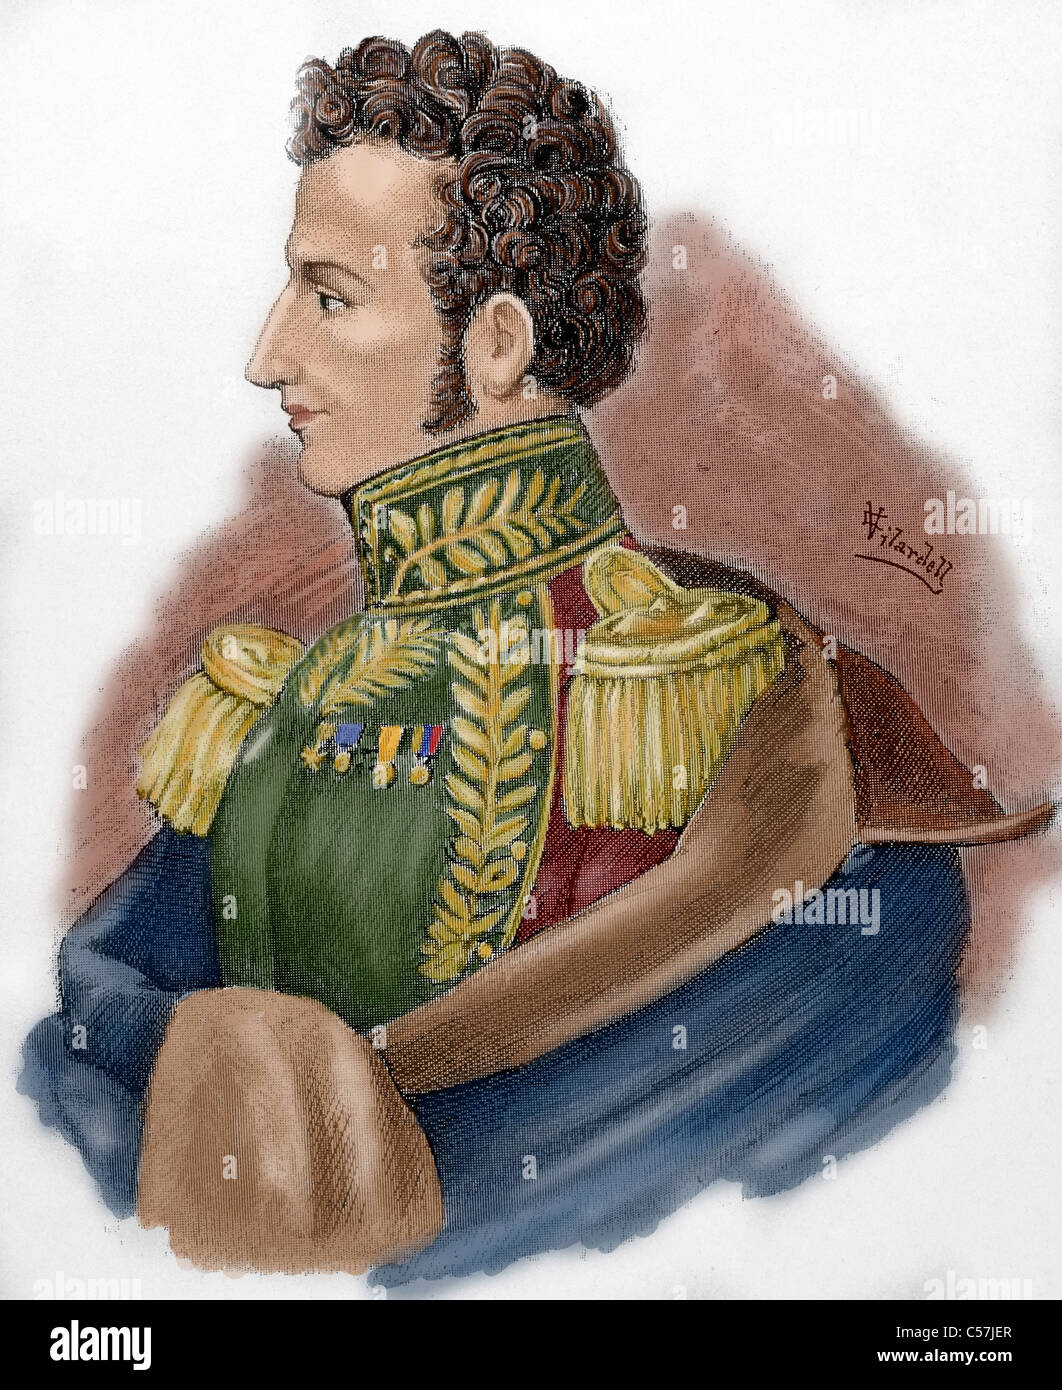 Antonio Jose de Sucre (1795-1830), known as the Grand Marshal of Ayacucho. Venezuelan independence leader, general and statesman Stock Photo